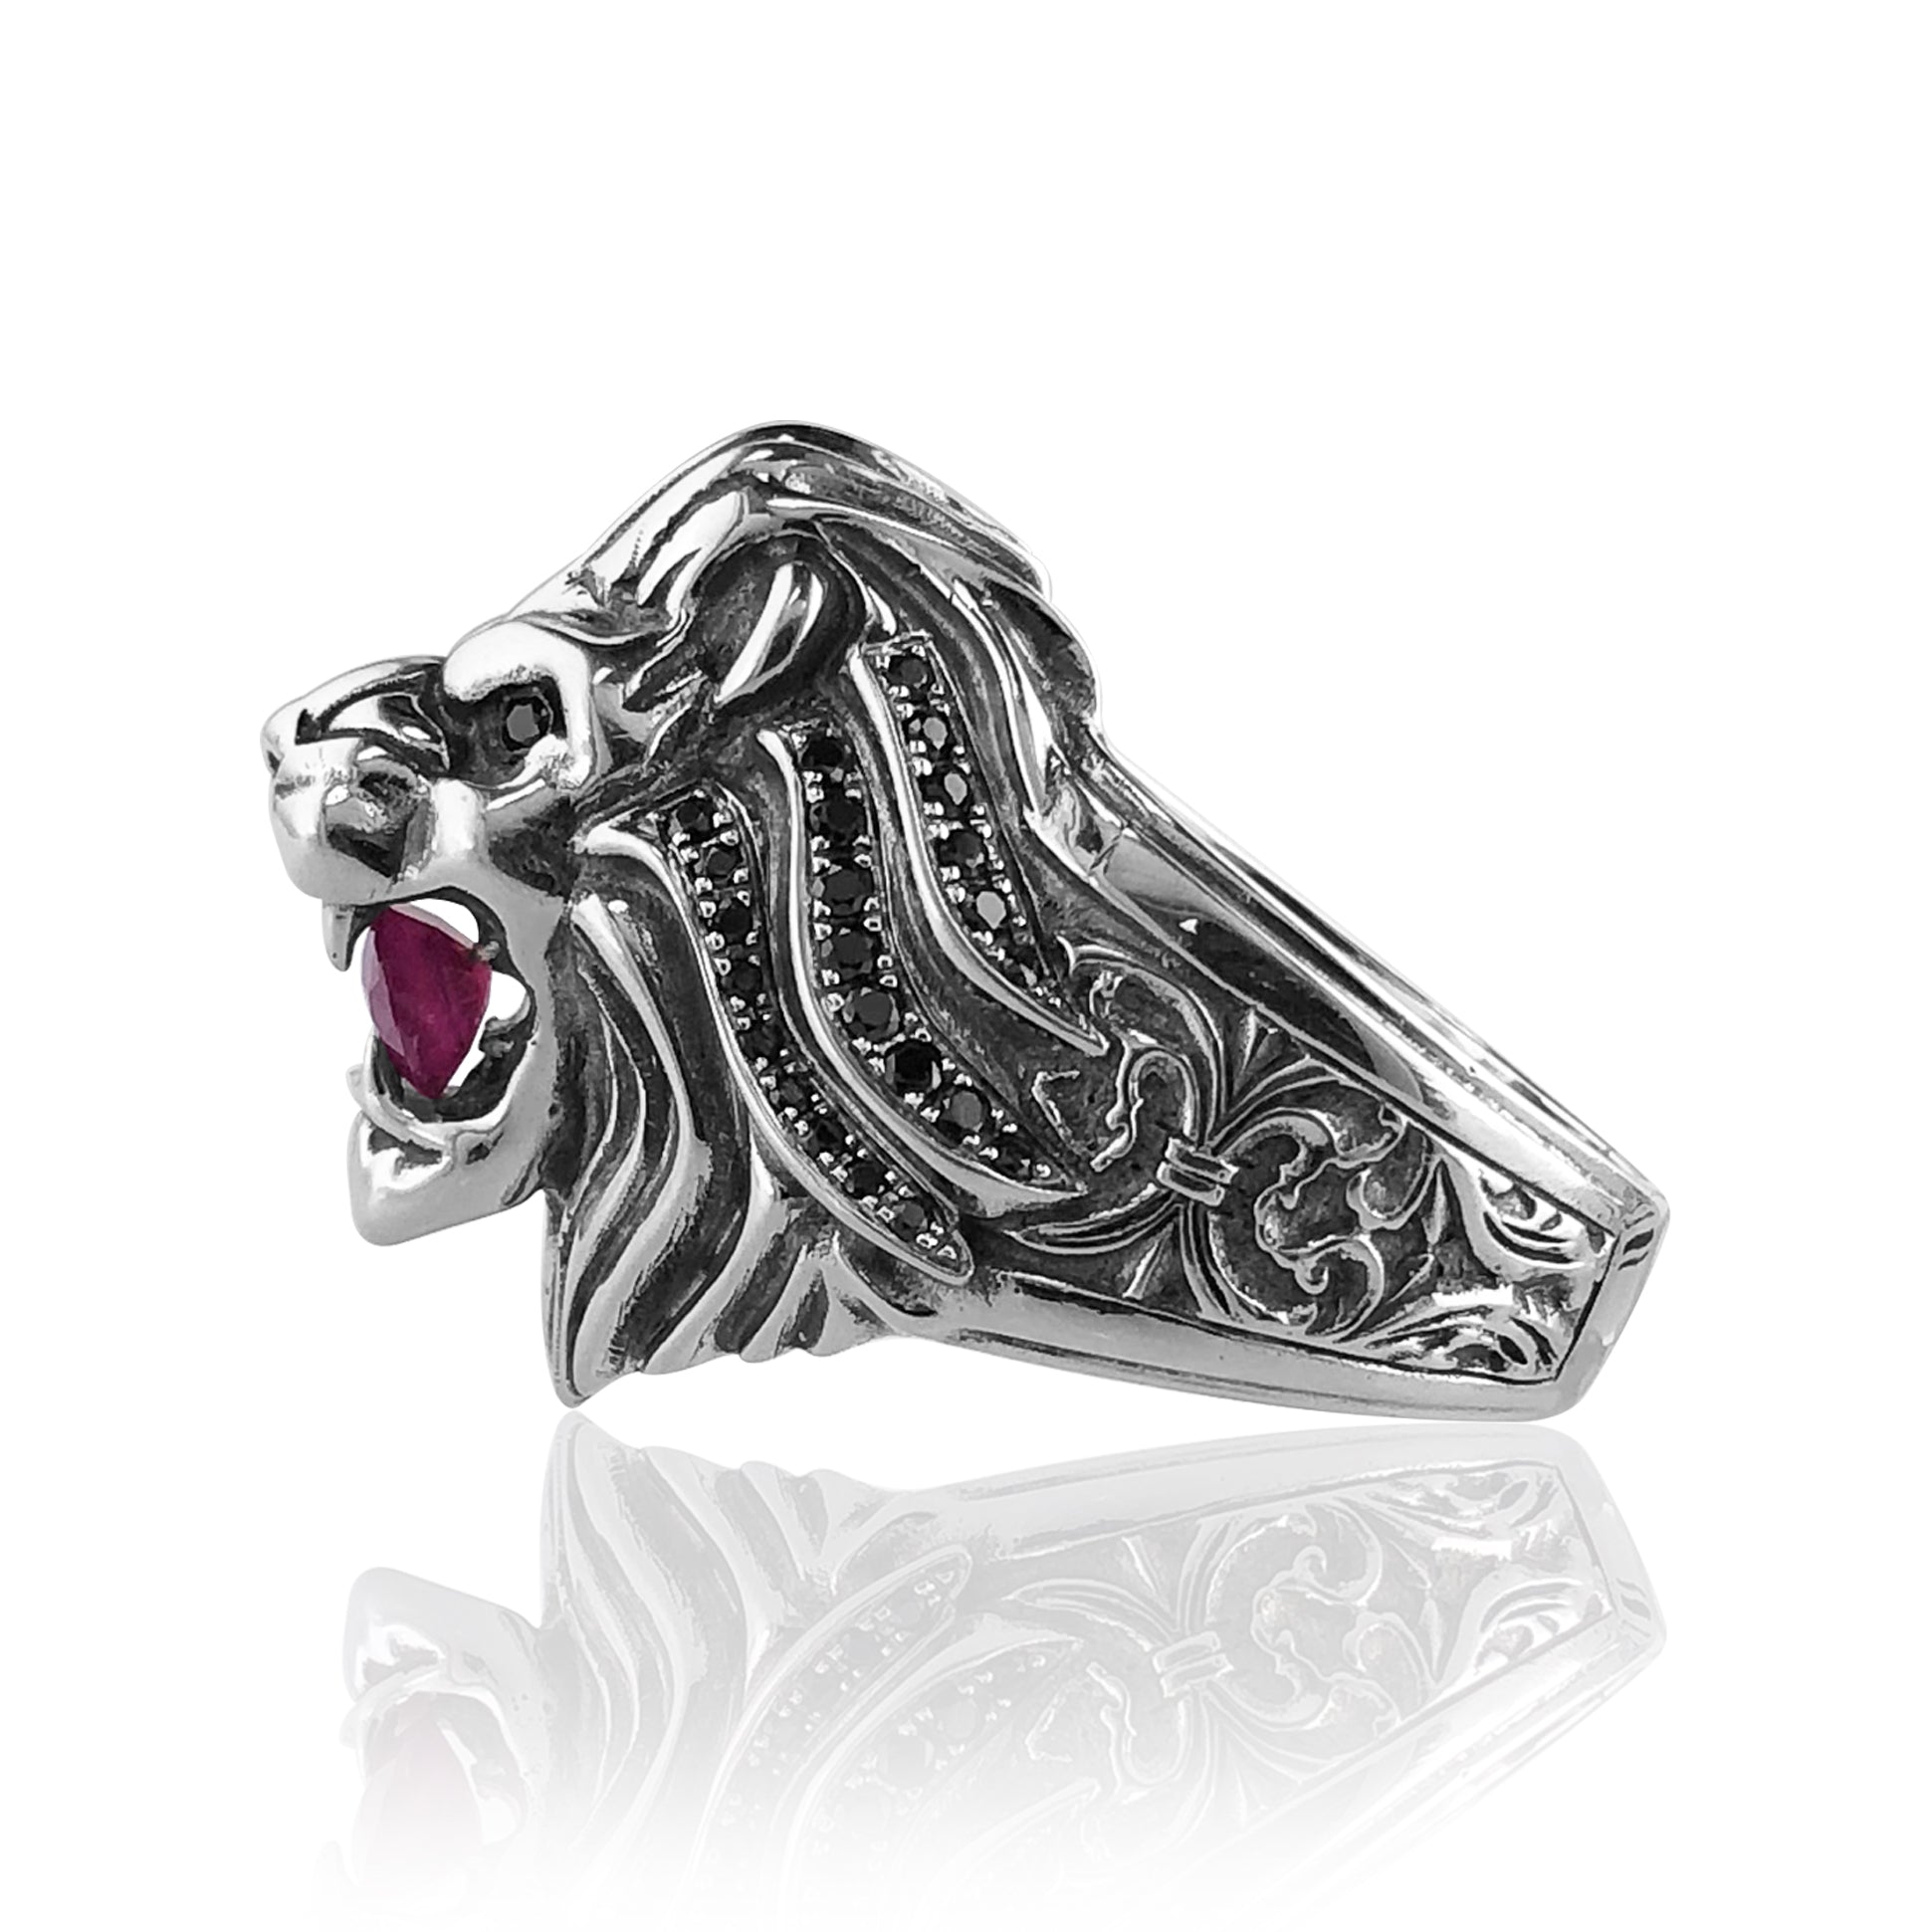 Ring - Sterling Silver Lion – Roman Paul Jewelry Design